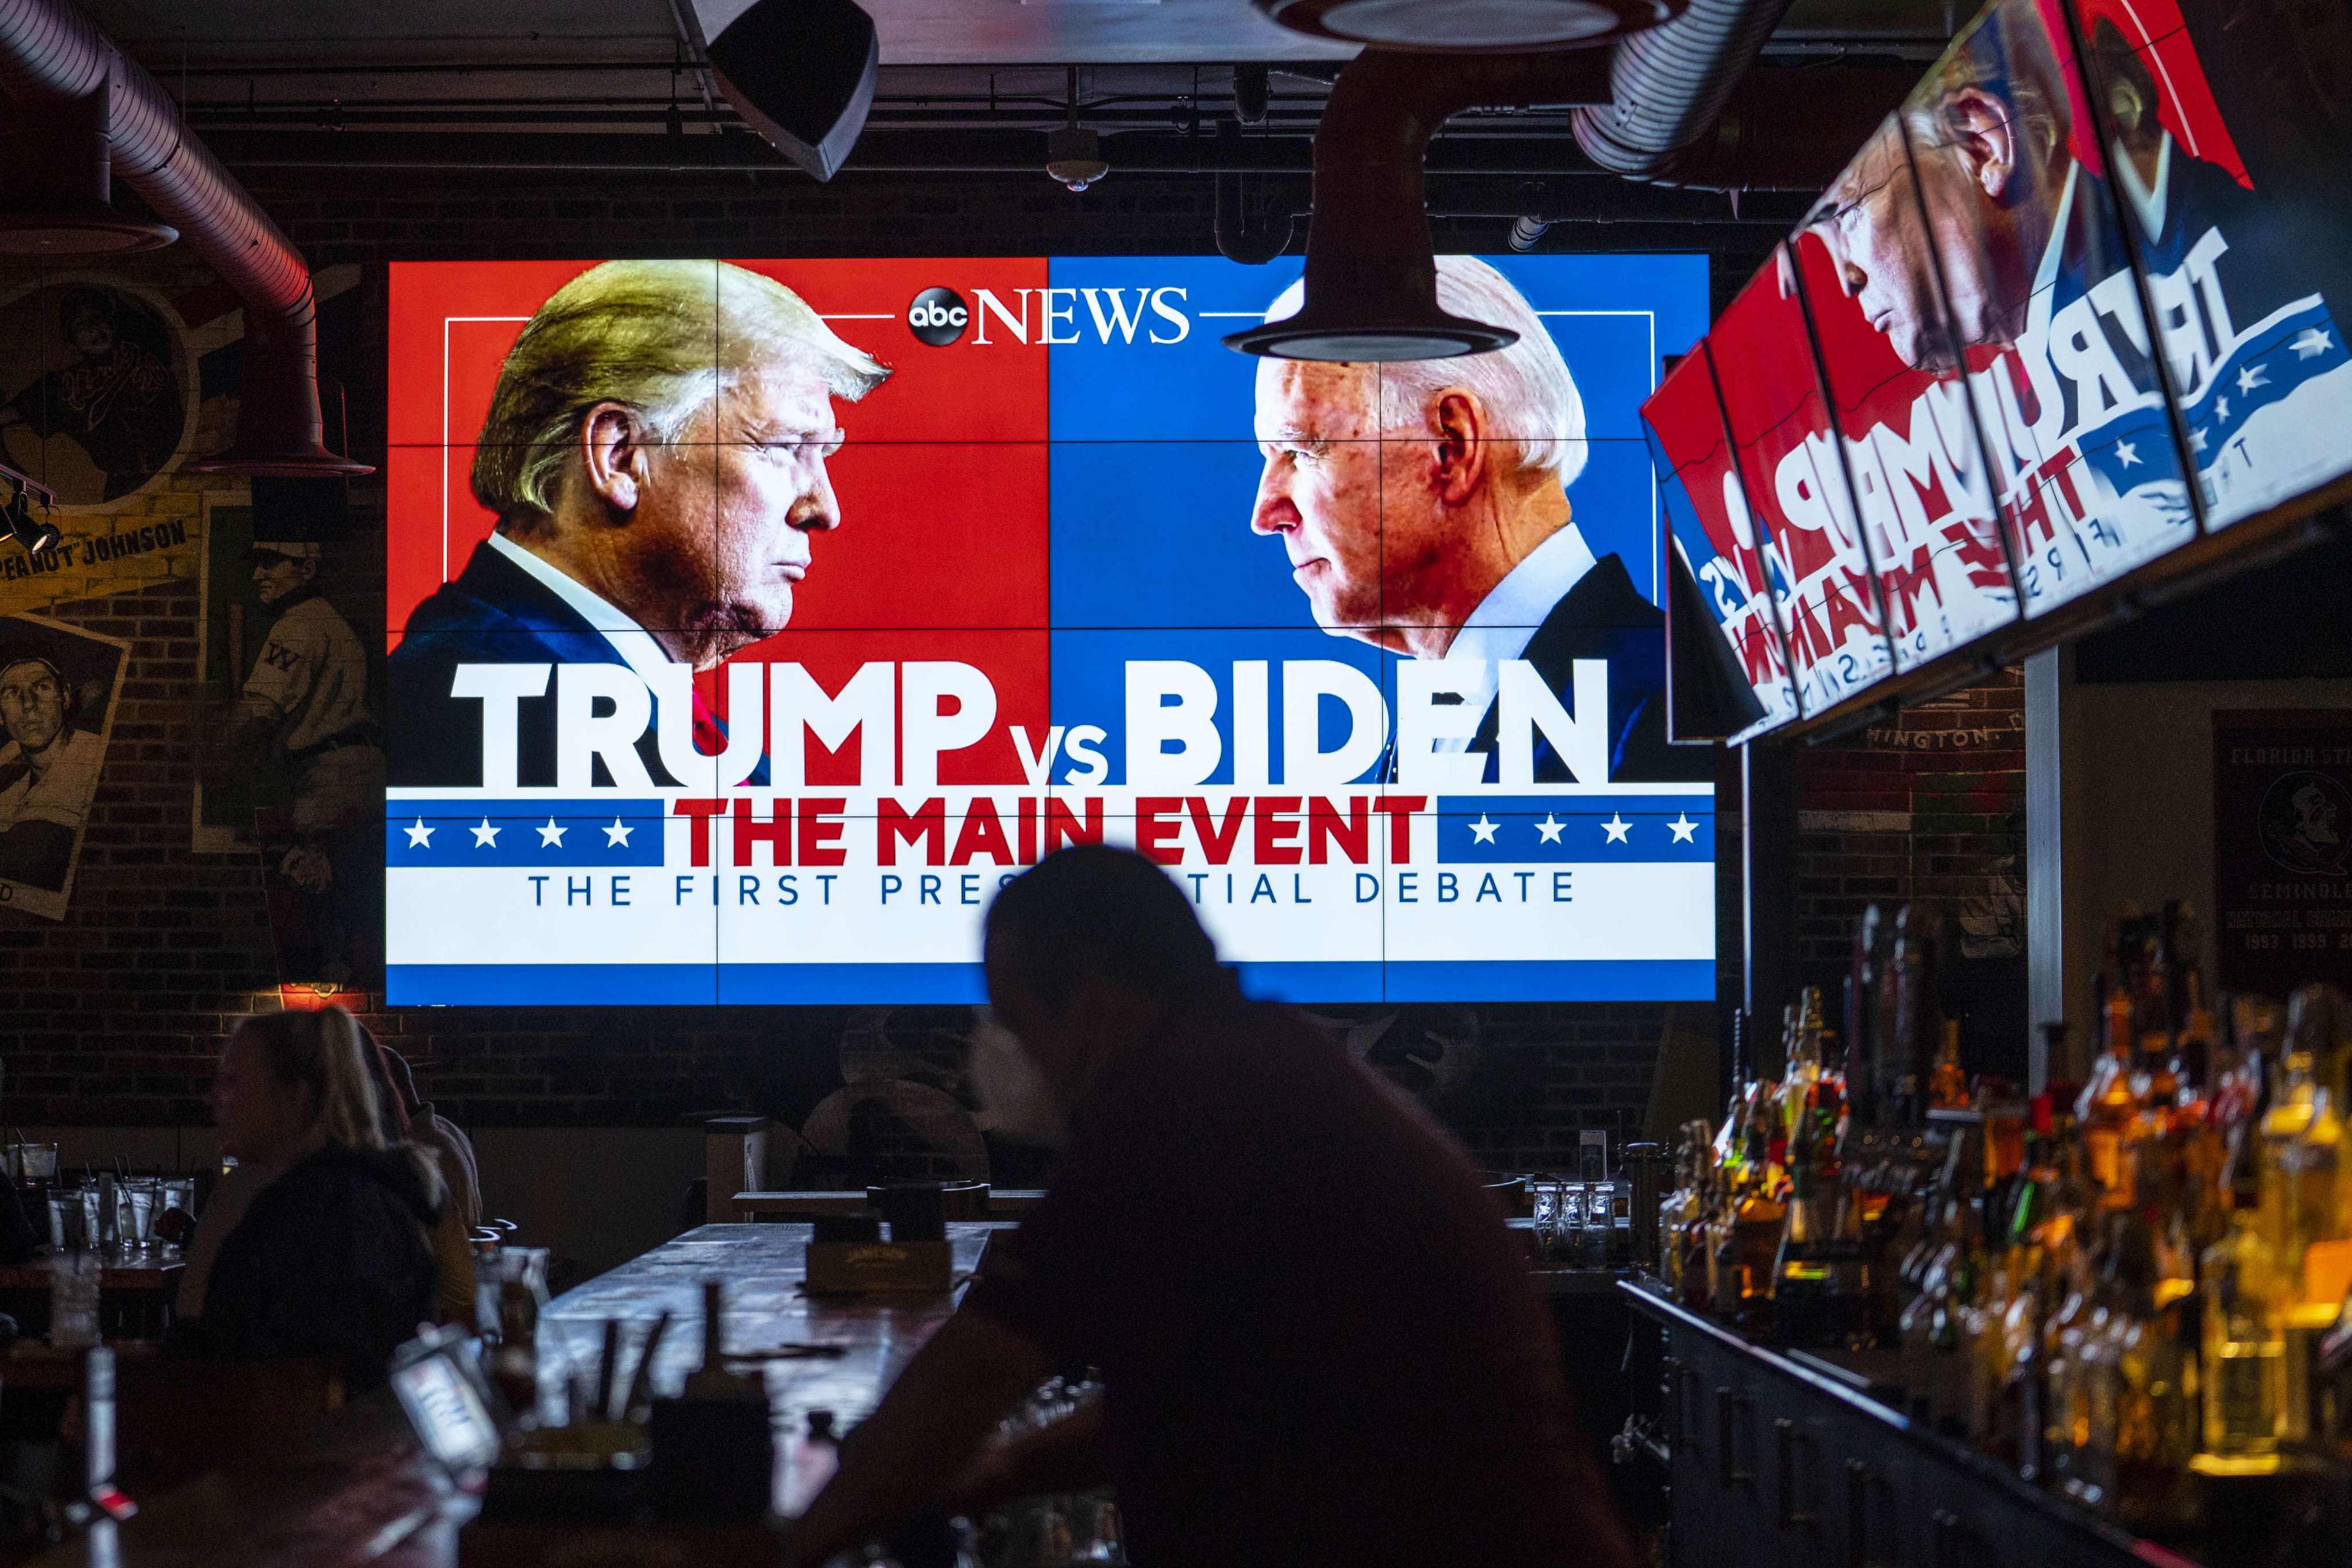 Television screens airing the first presidential debate are seen at a bar in Washington in September 2020. Photo: AFP